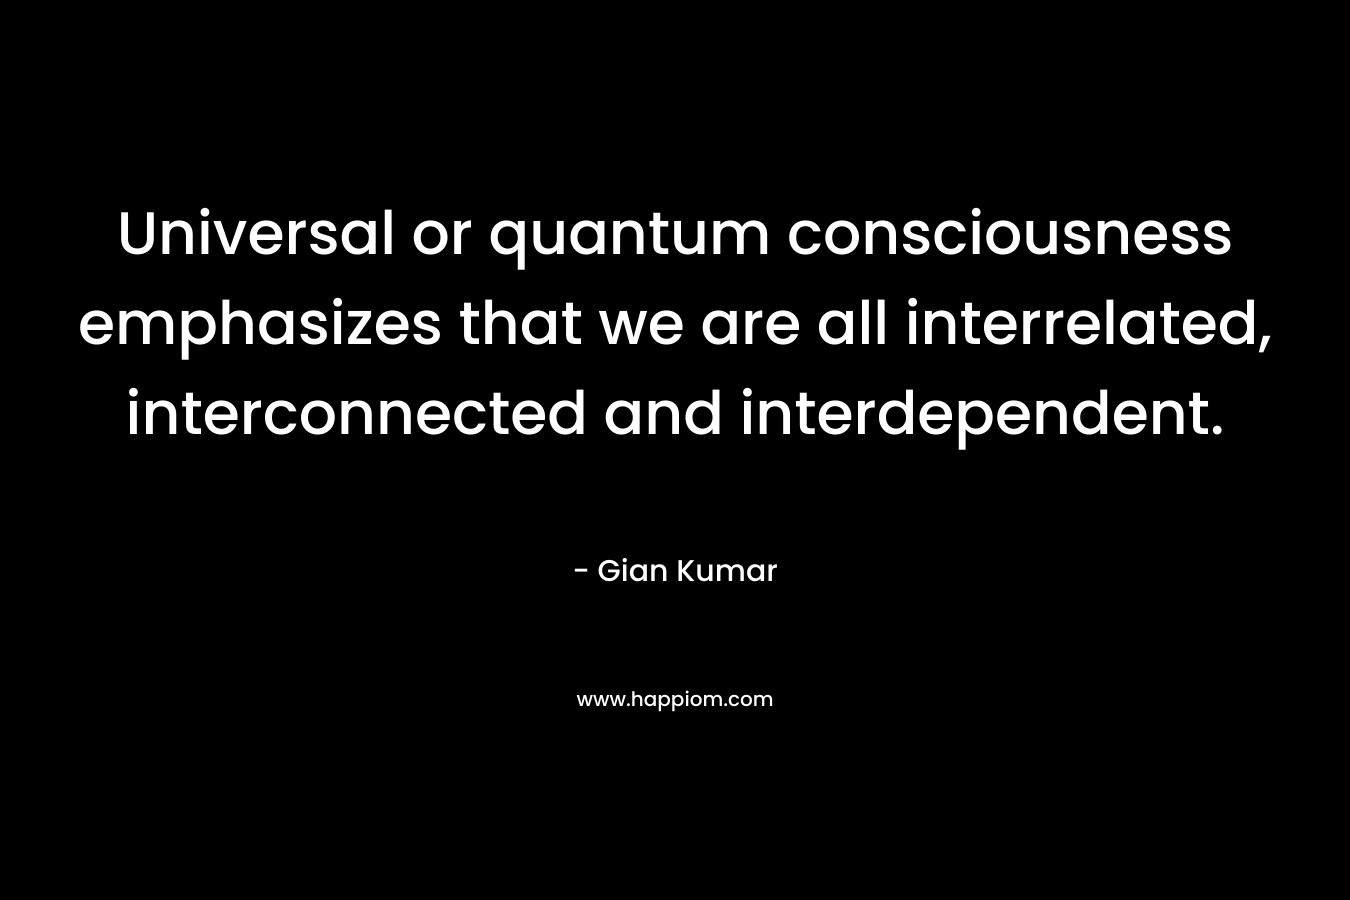 Universal or quantum consciousness emphasizes that we are all interrelated, interconnected and interdependent.